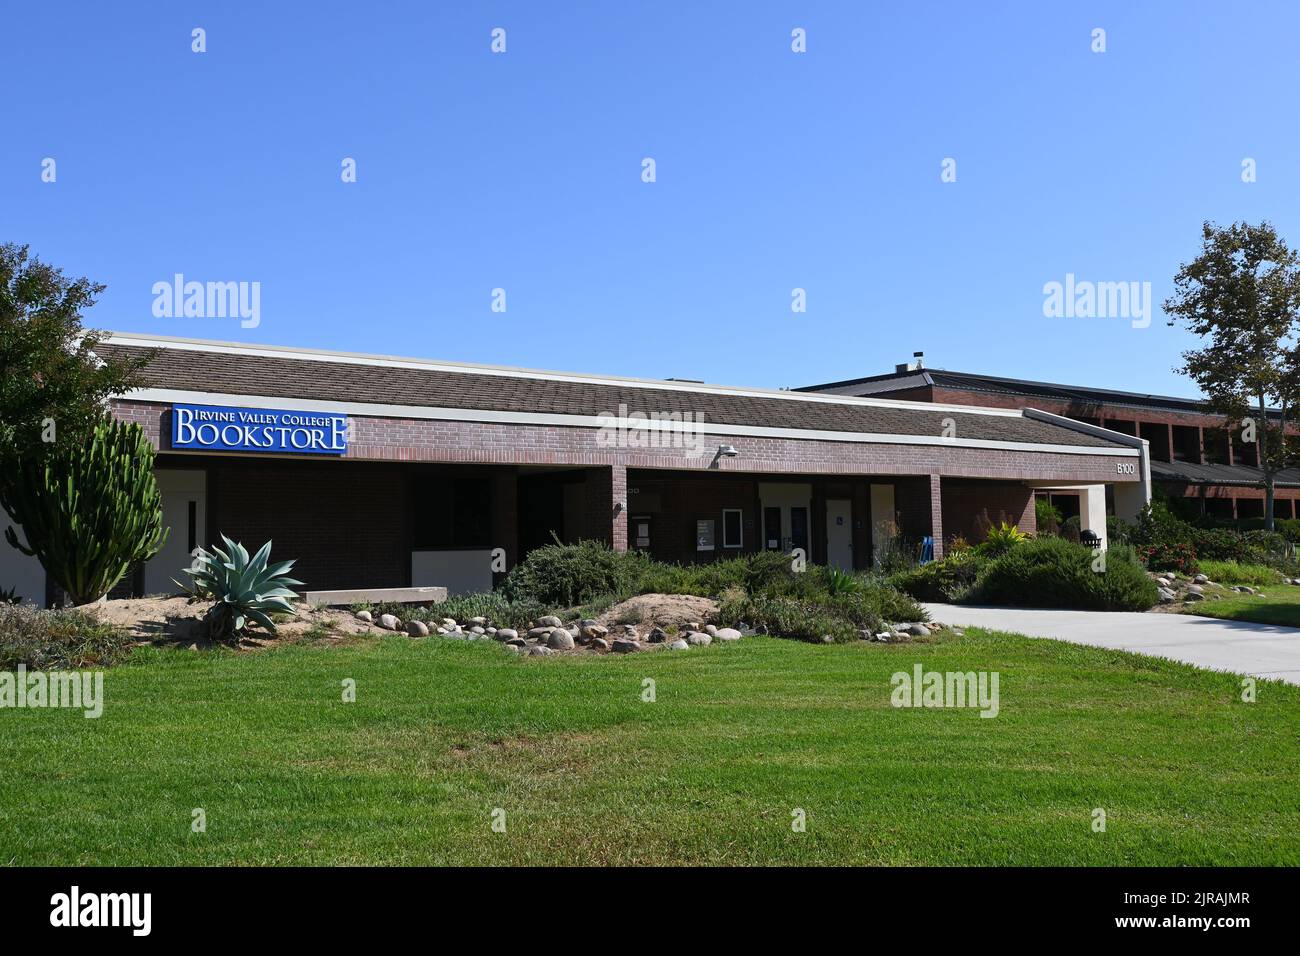 IRVINE, CALIFORNIA - 21 AUG 2022: The Student Bookstore, on the campus of Irvine Valley College, IVC. Stock Photo